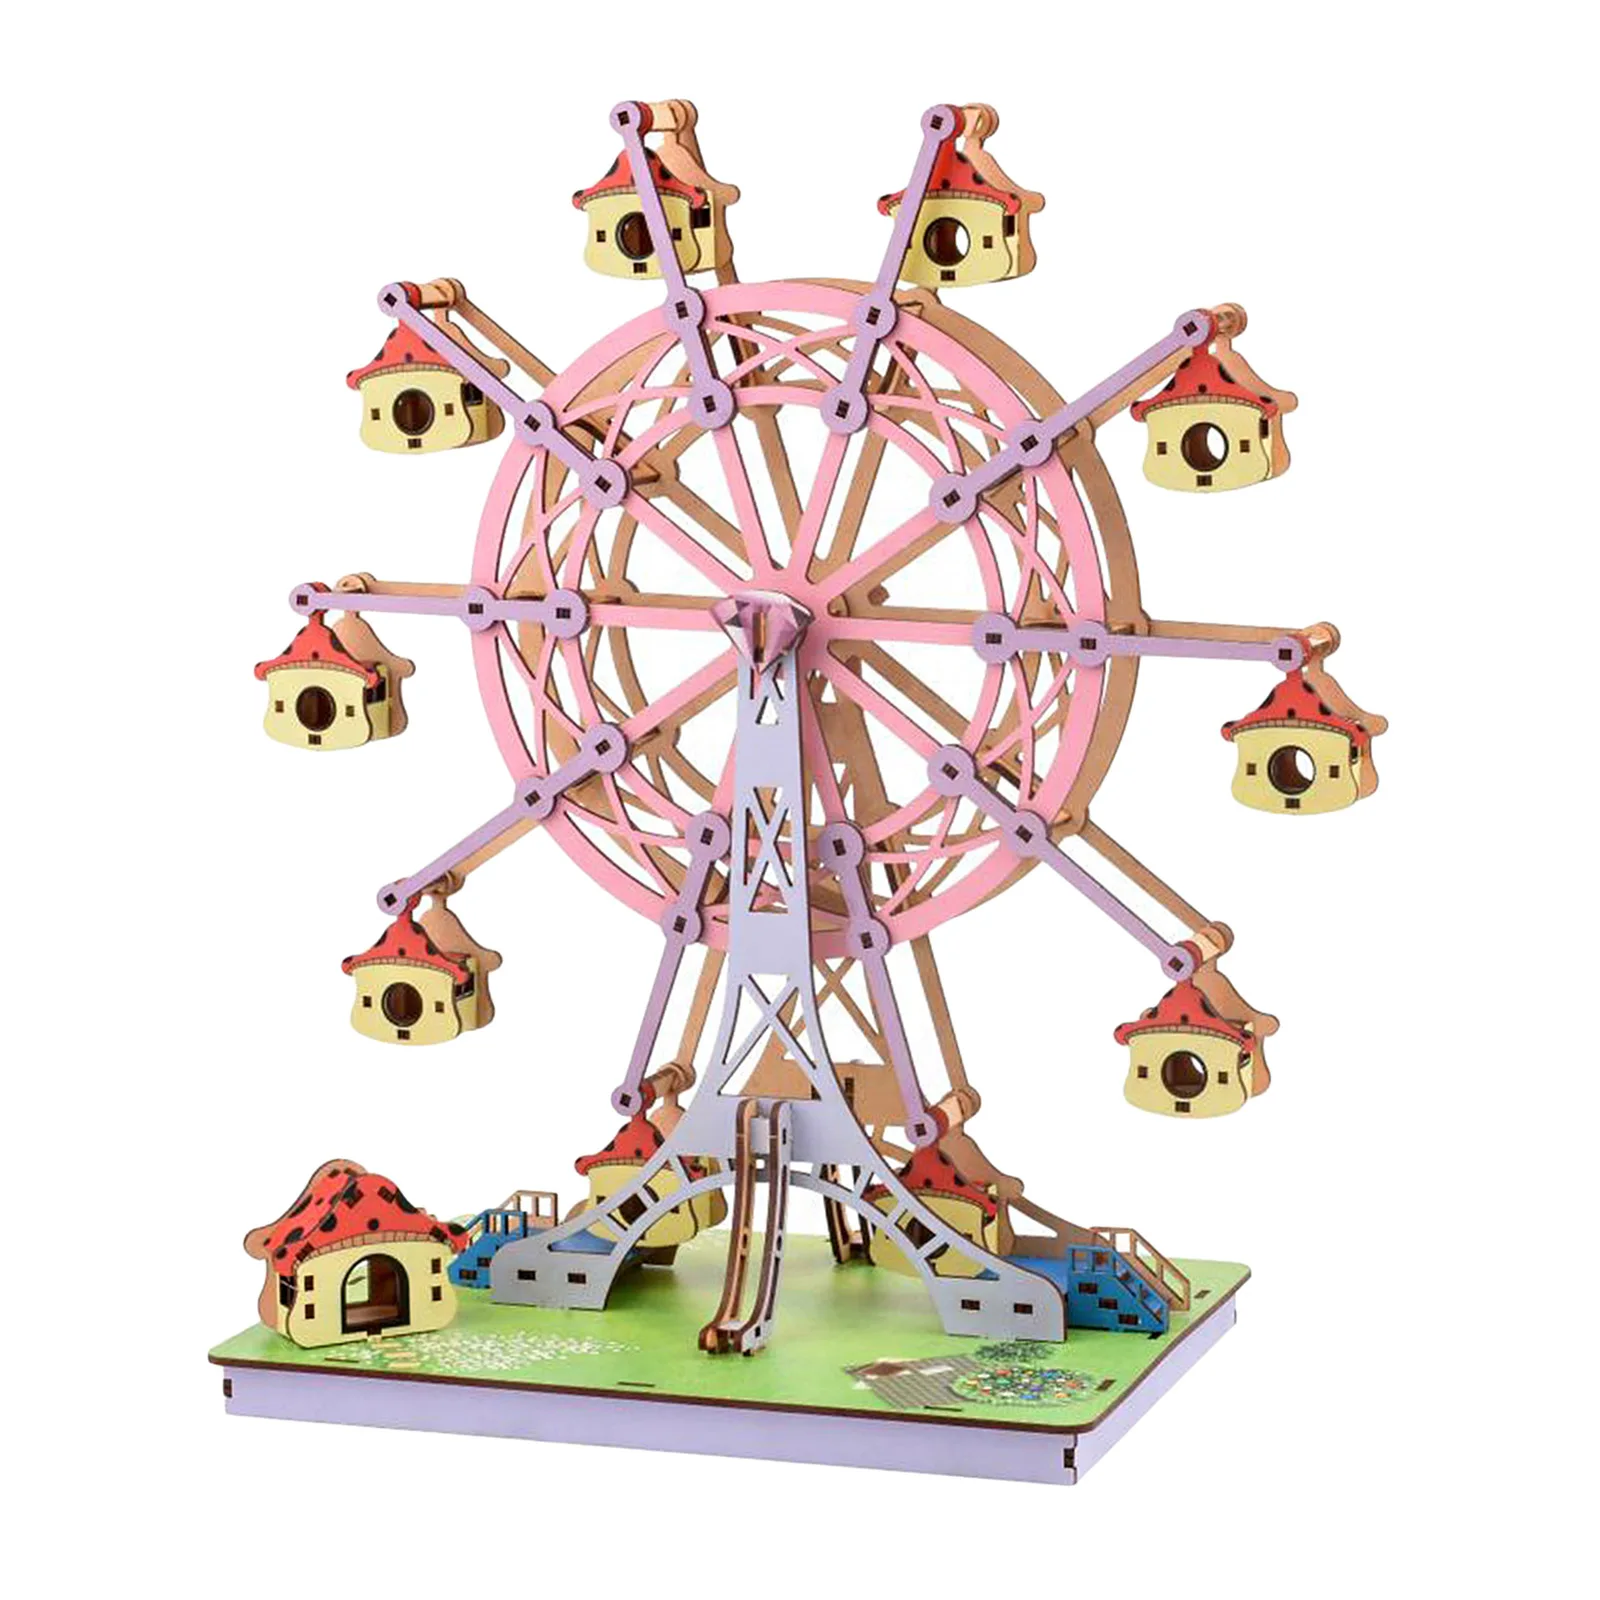 DIY 3D Wooden Puzzle Ferris Wheel Model Building Kit Toys Gift for Children Adult Teens Craft Toy